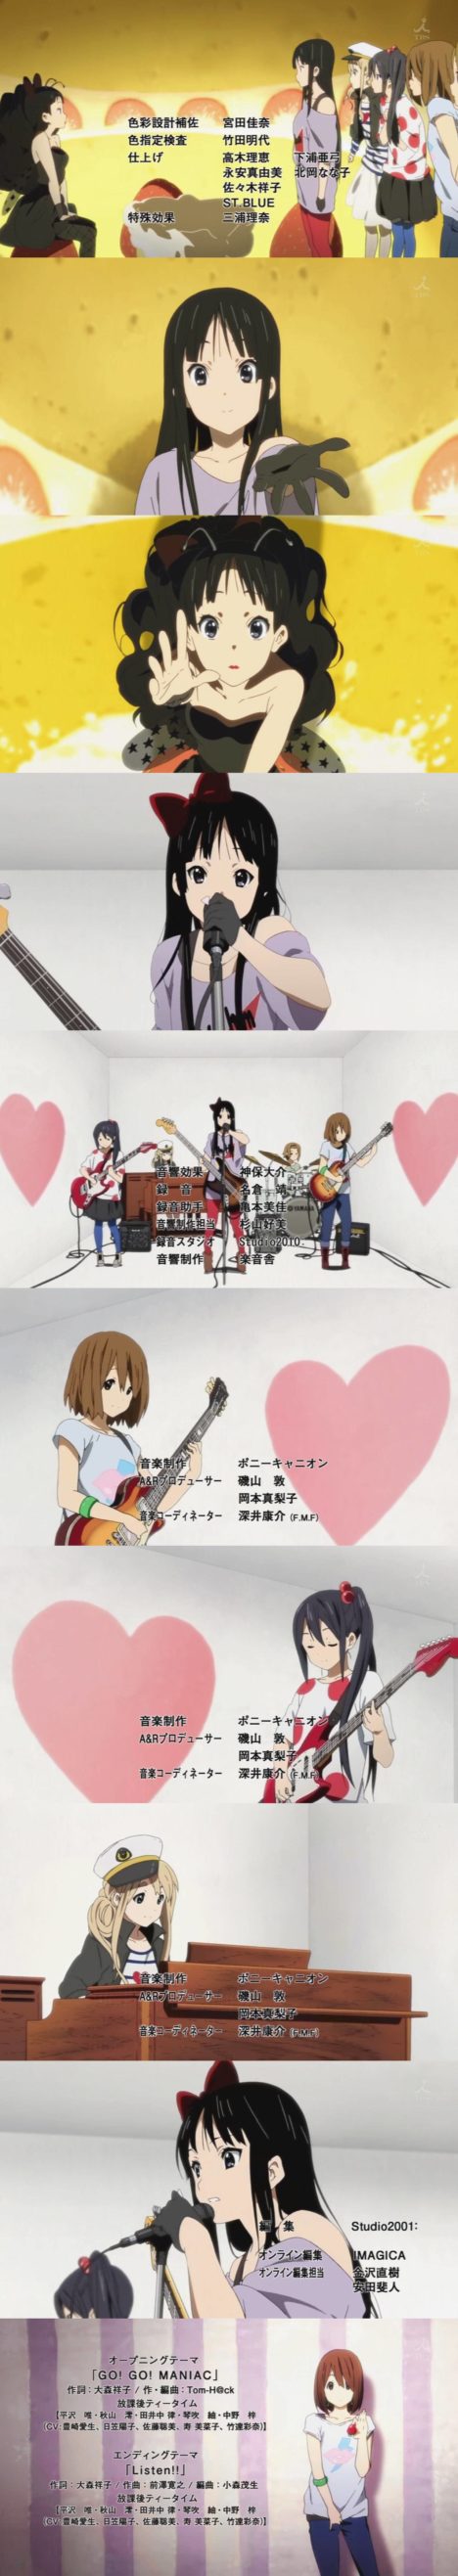 k-on_episode_one_95